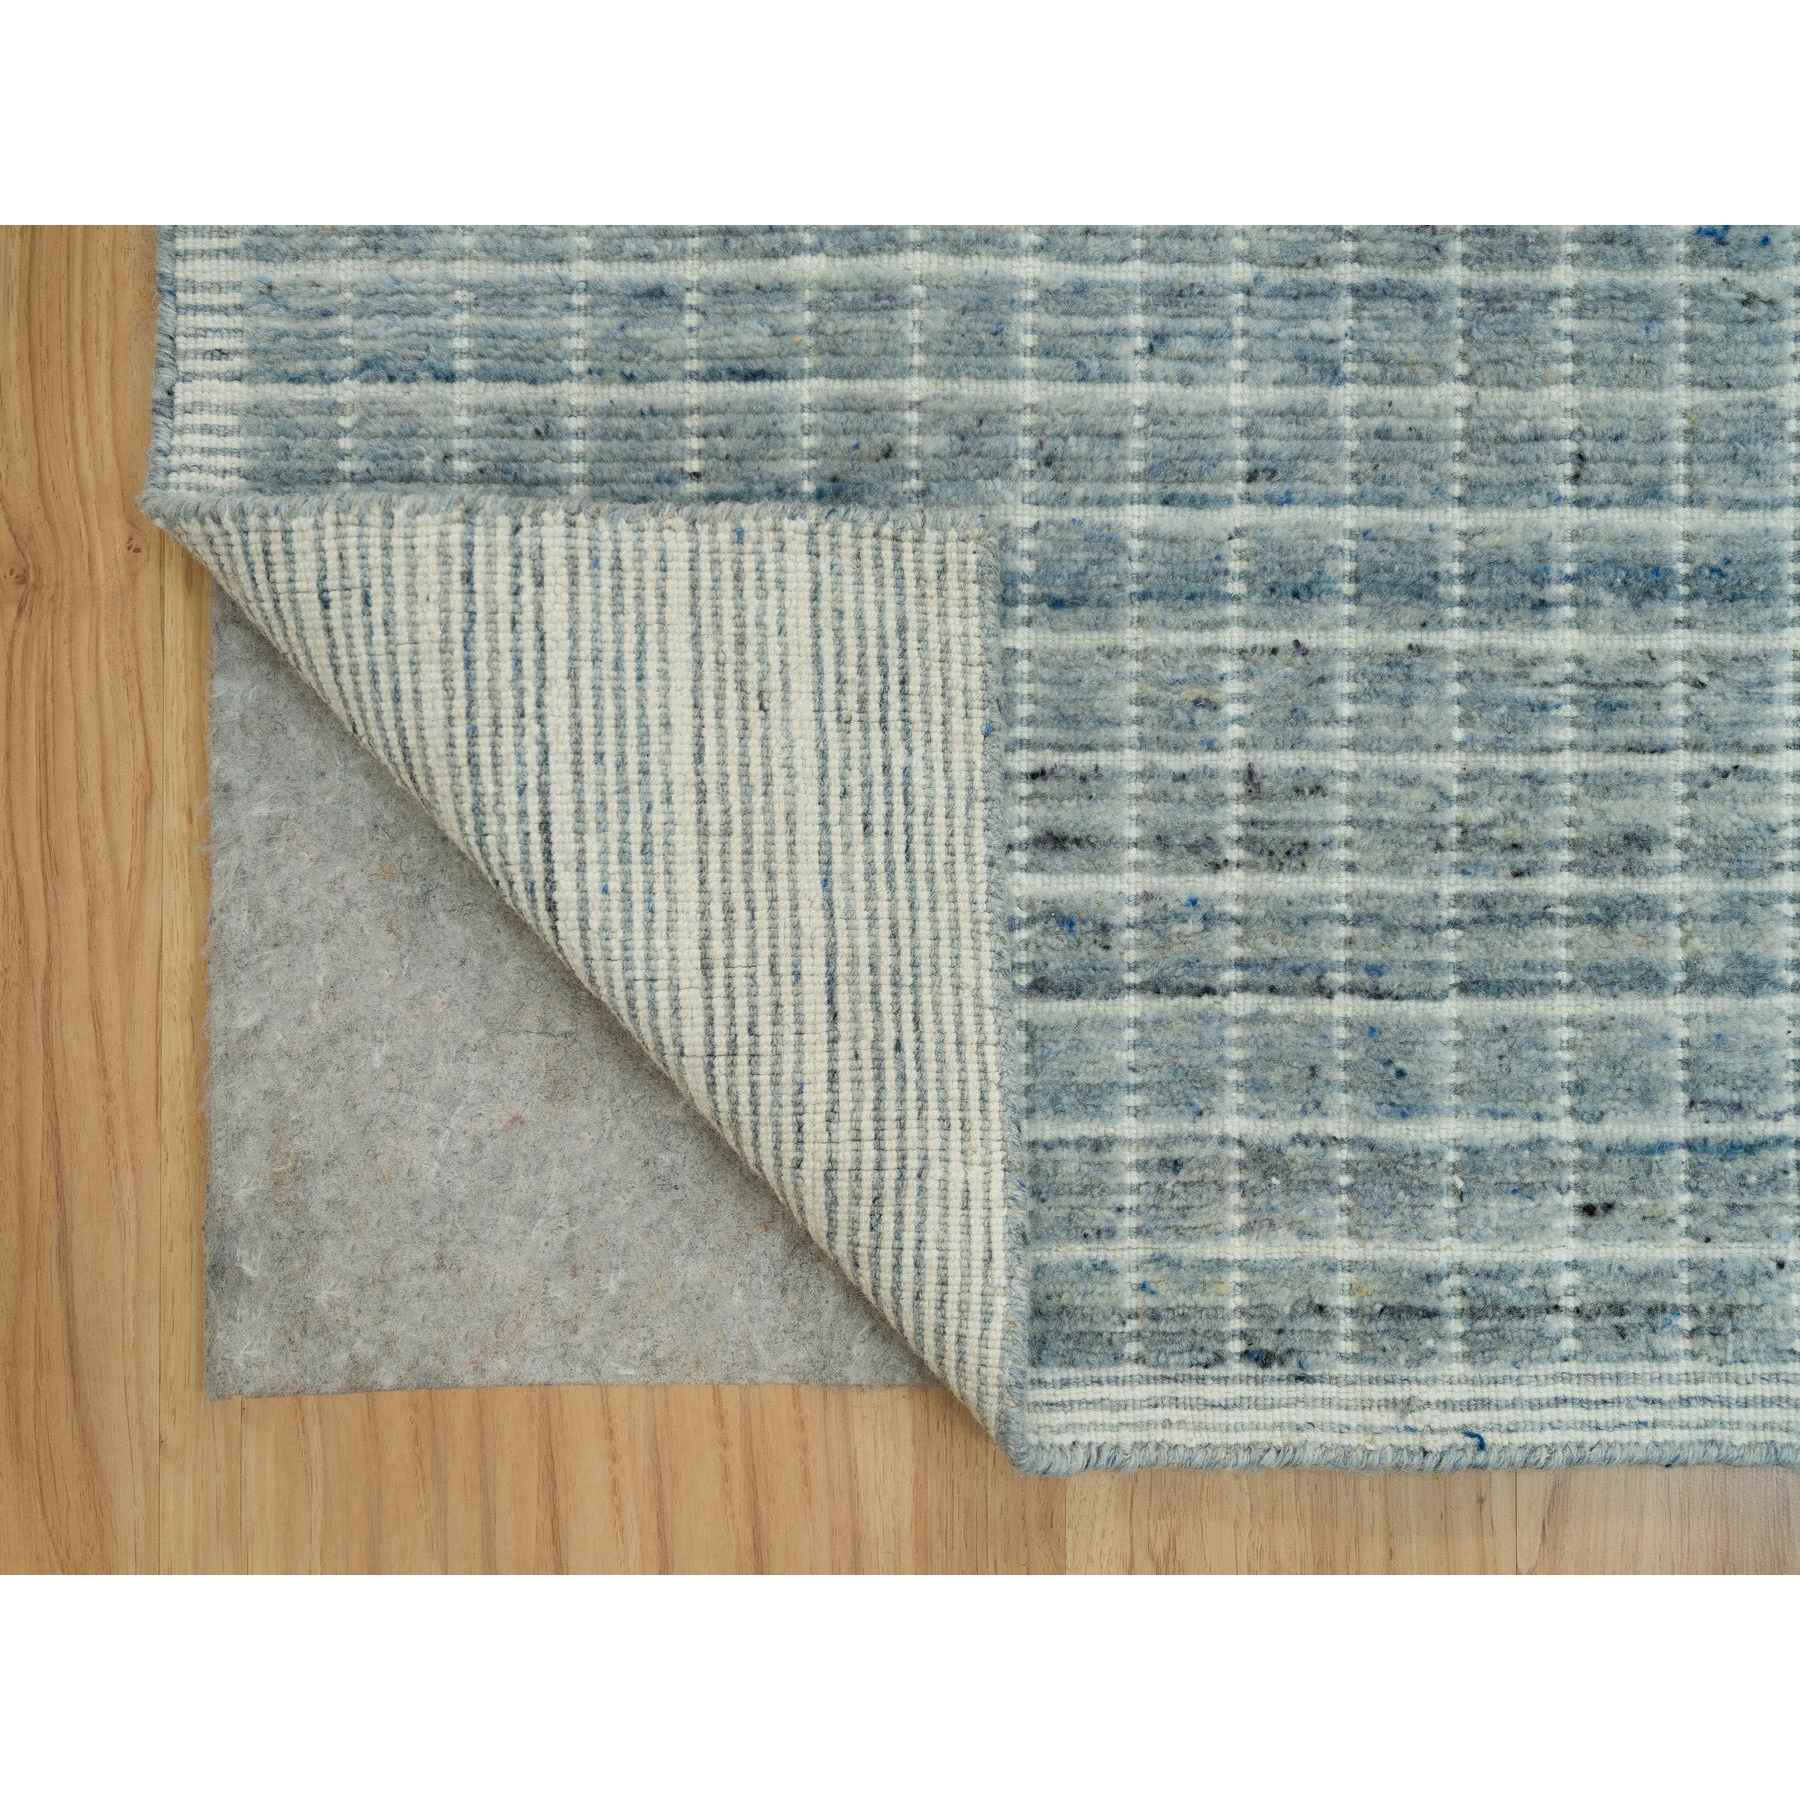 Modern-and-Contemporary-Hand-Loomed-Rug-450960